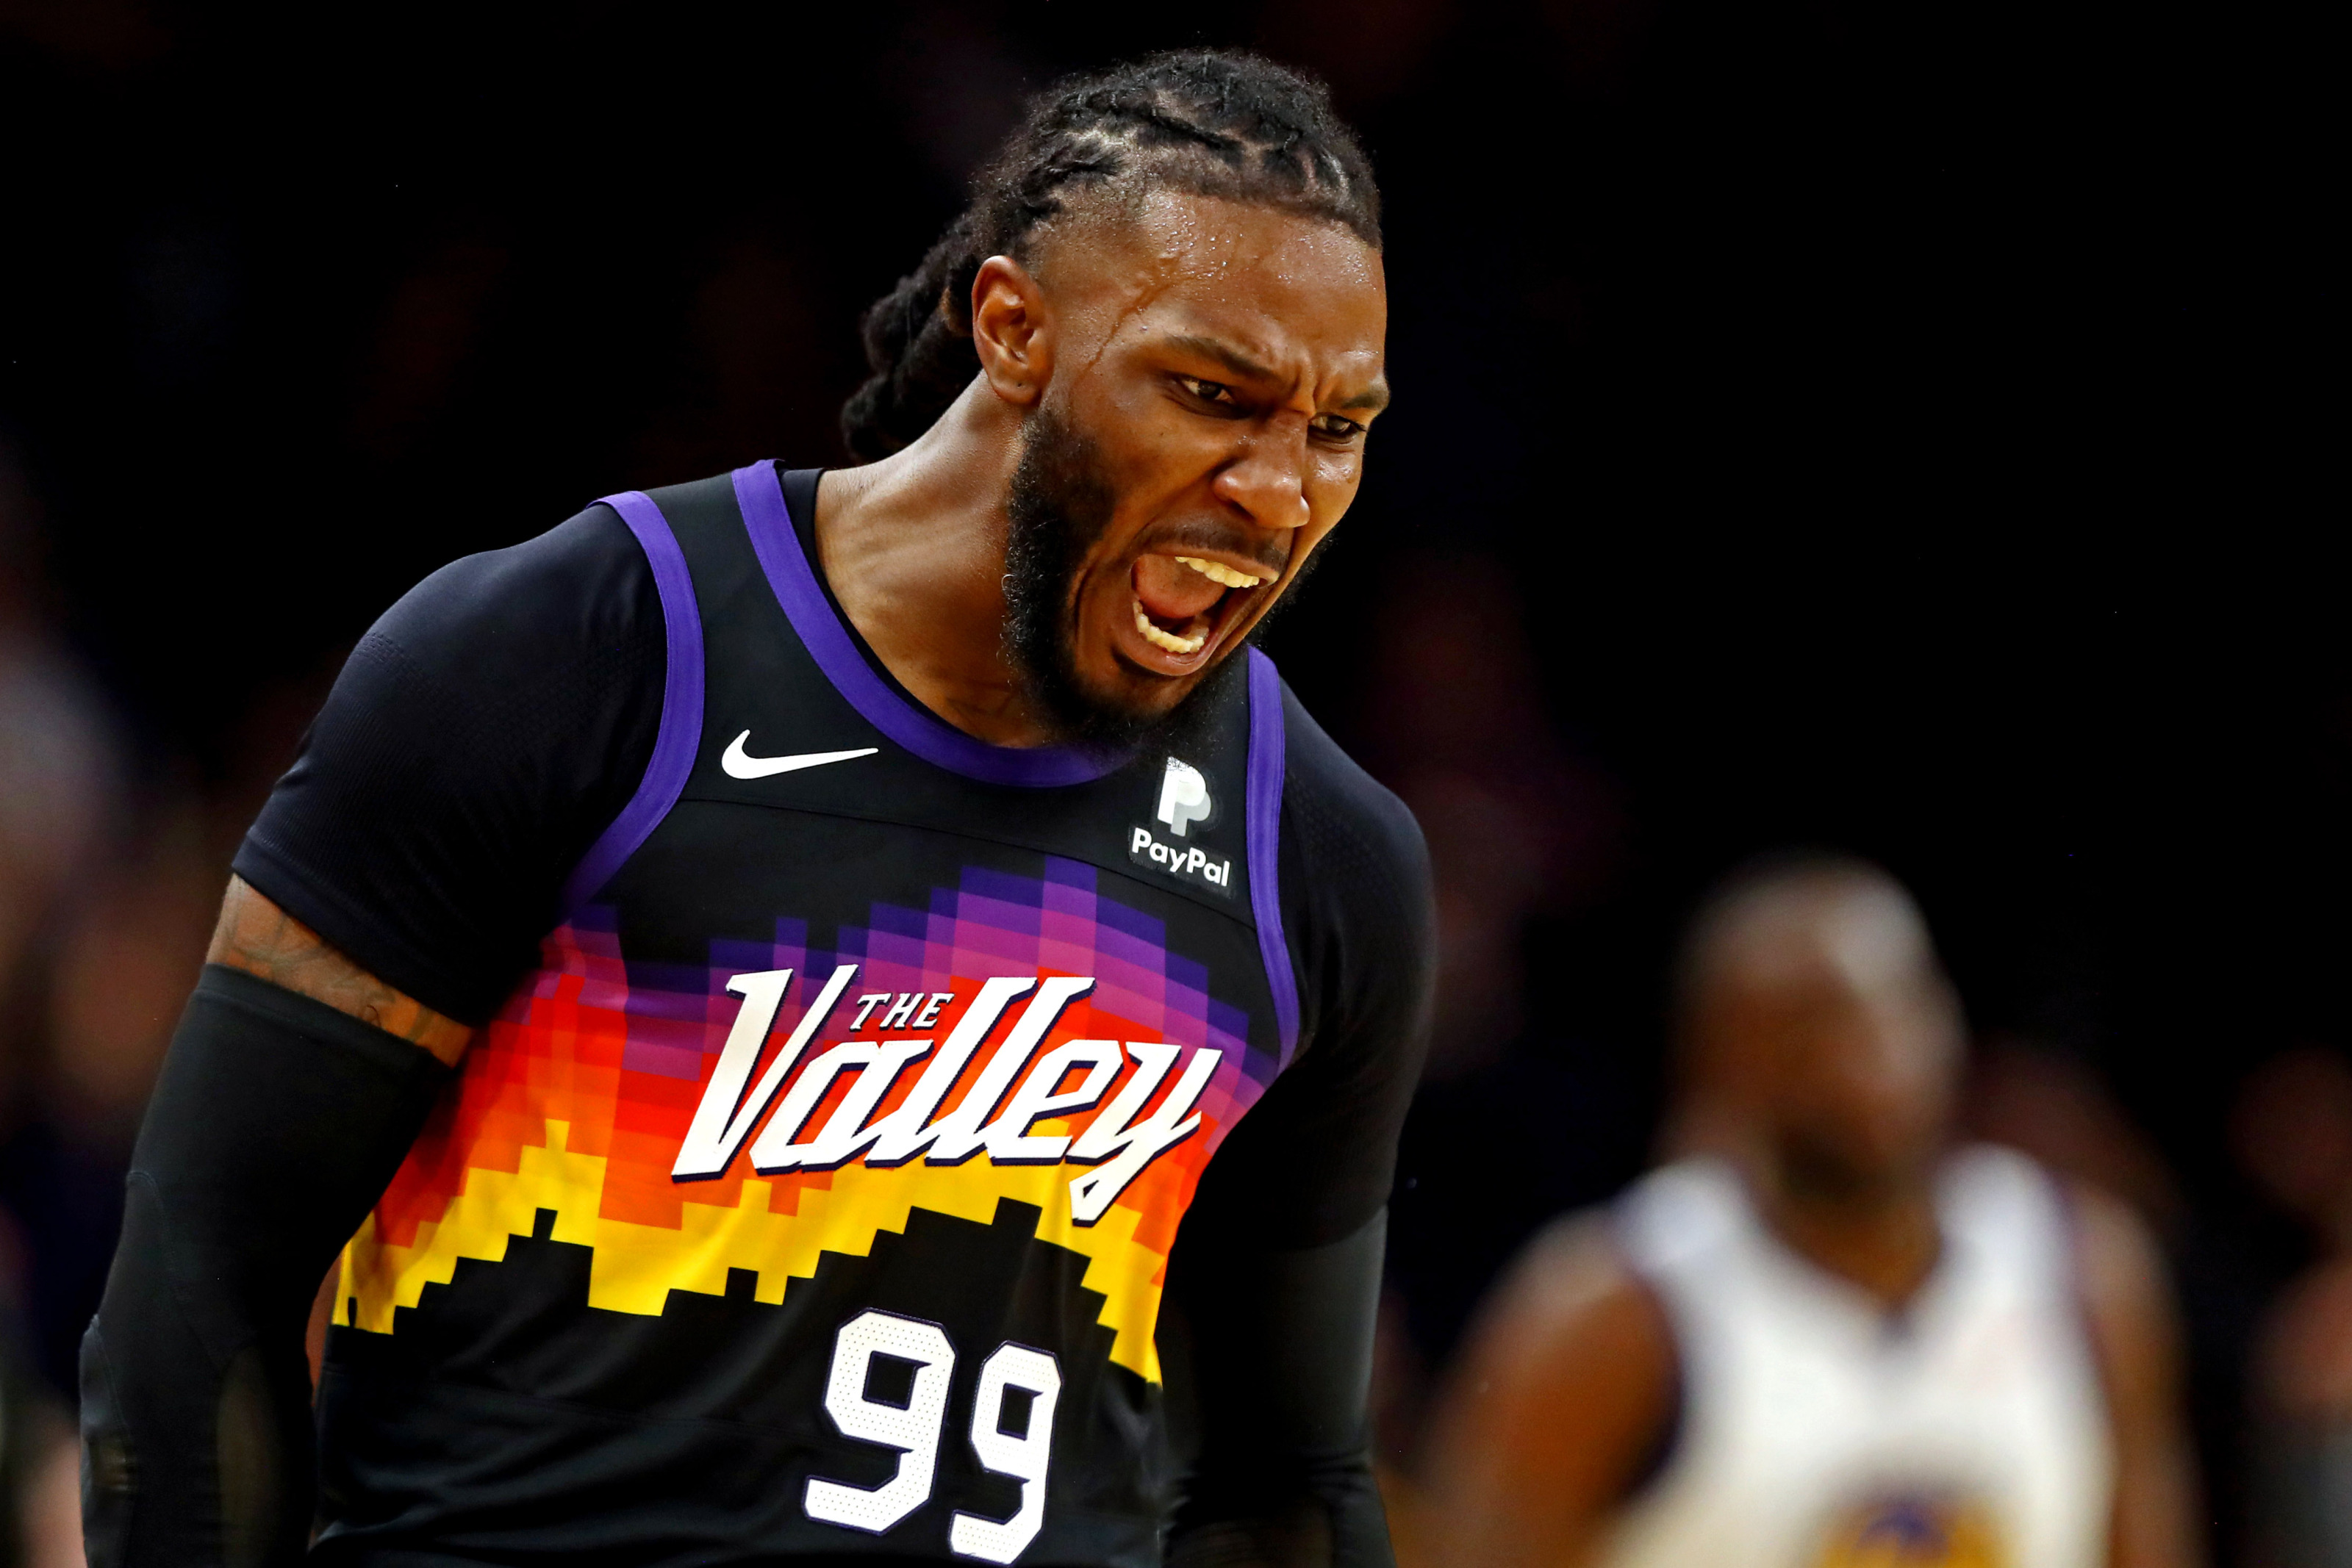 Jae Crowder's father hopes his son spends rest of career in Utah